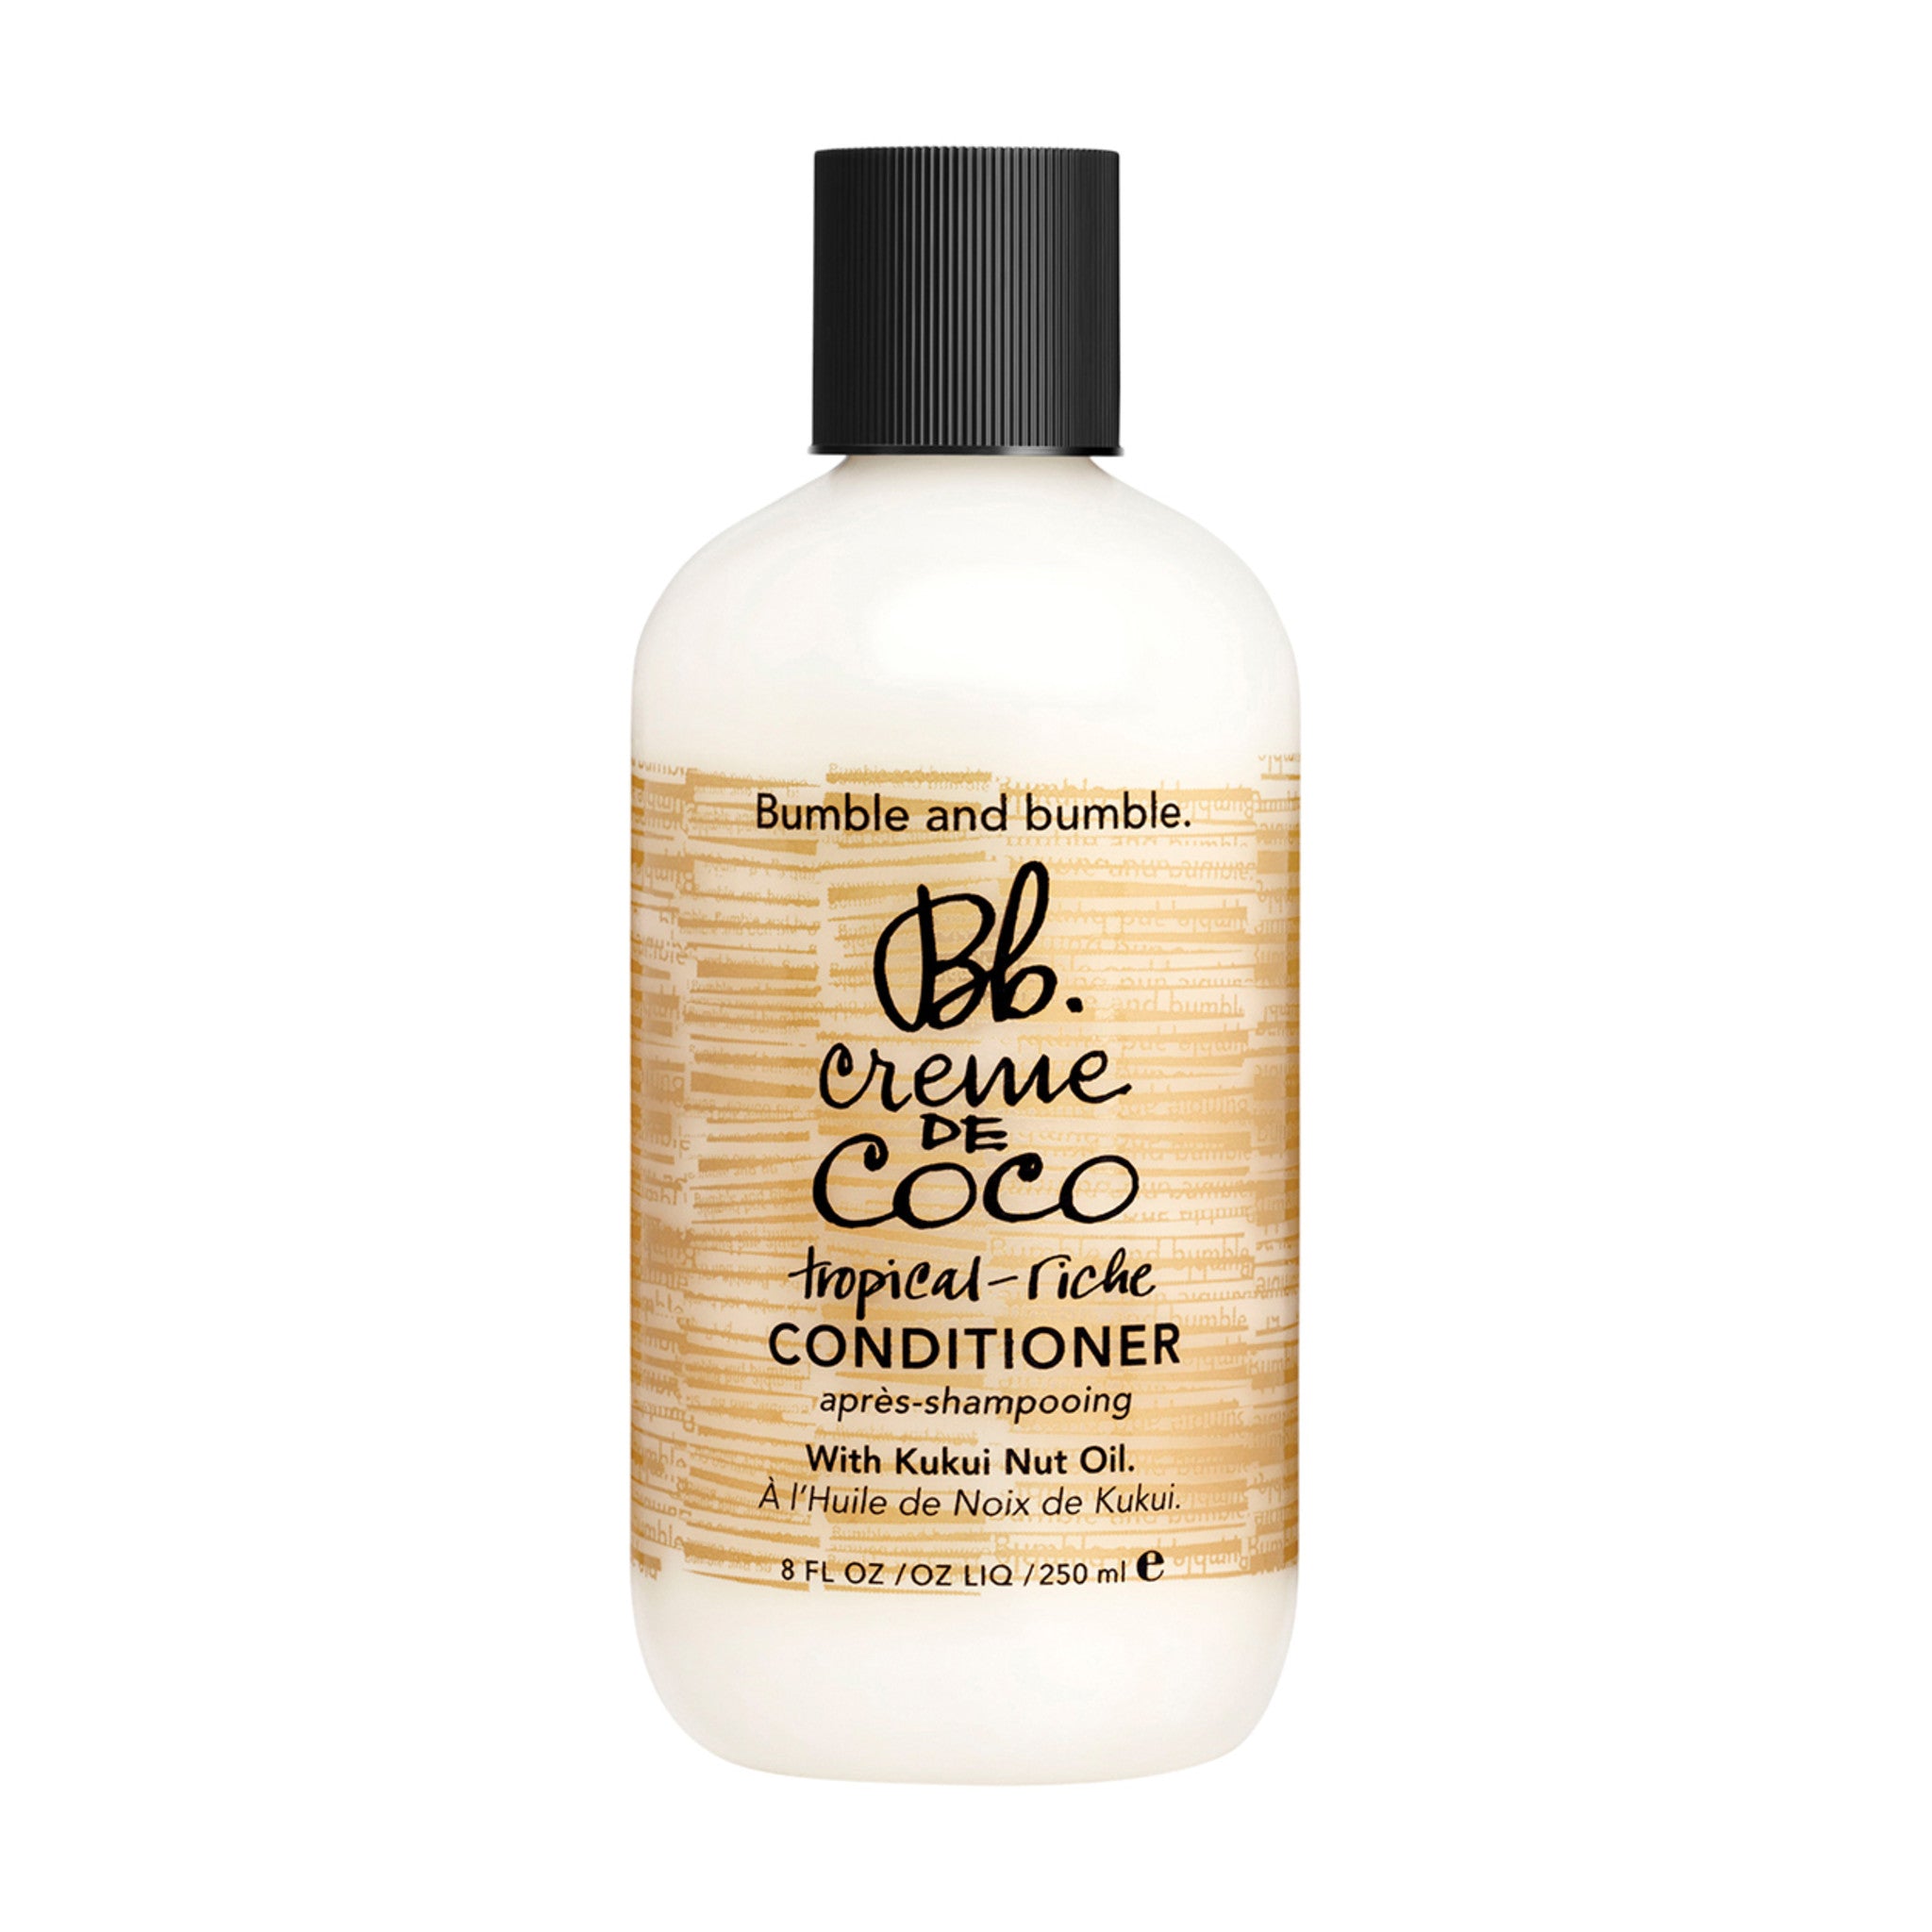 Bumble and Bumble Creme de Coco Conditioner Size variant: 8 Oz. main image.